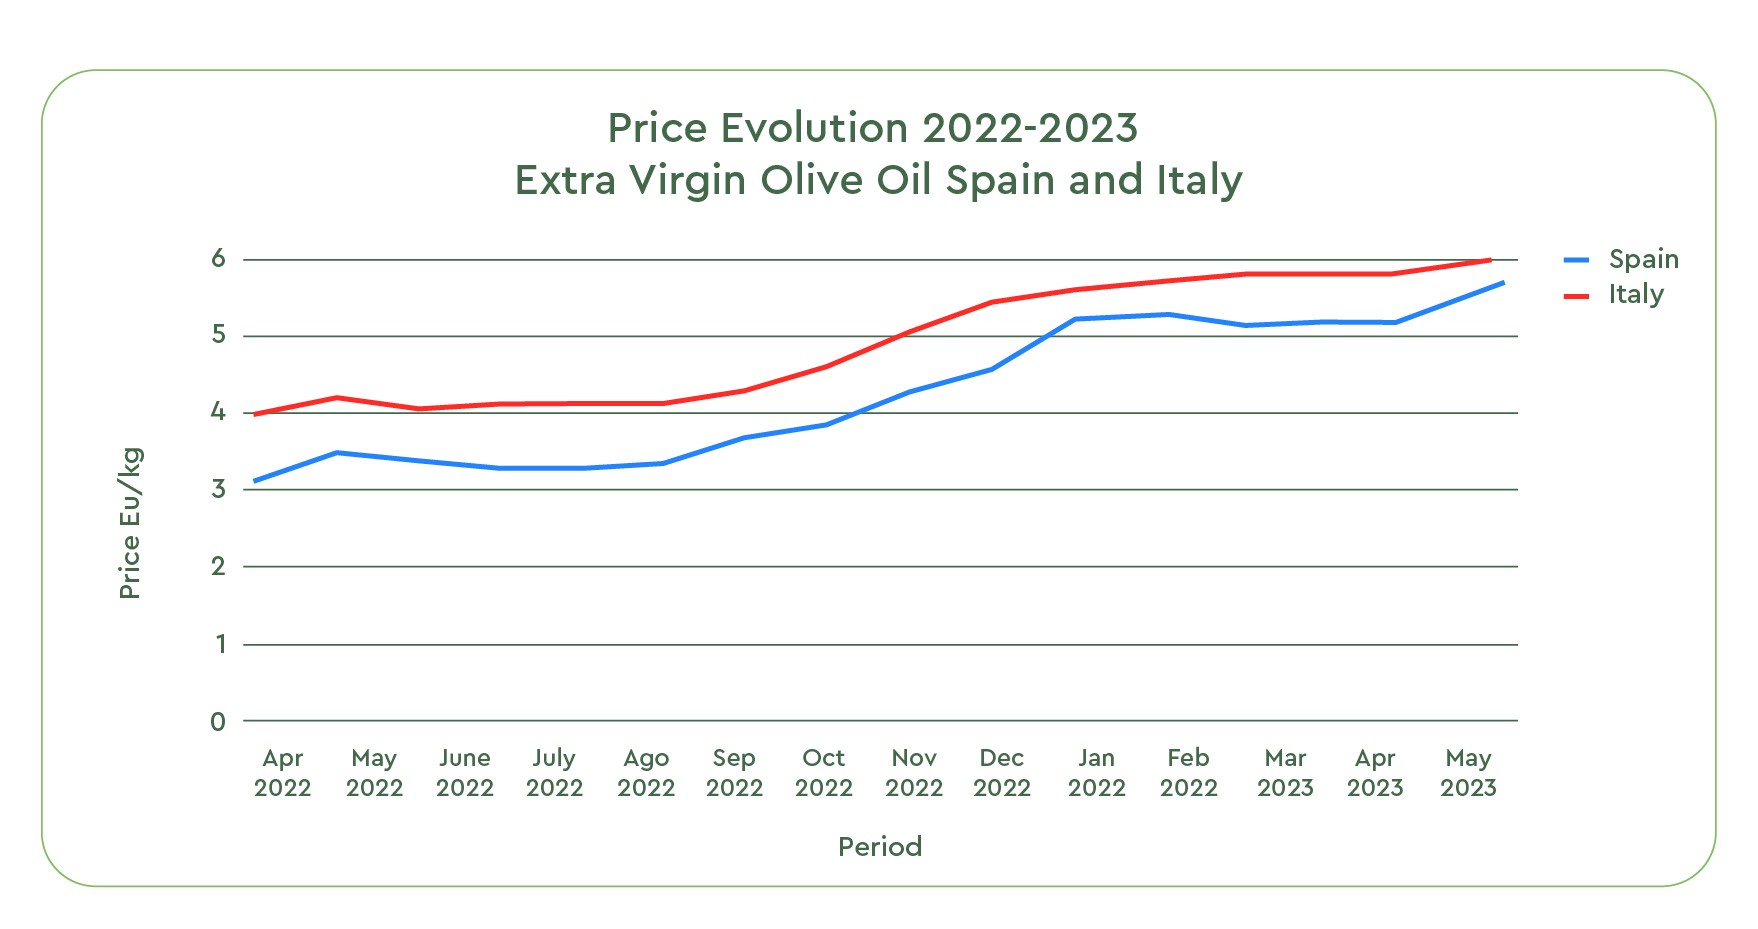 Price evolution of extra virgin olive oil in Spain and Italy - Certified Origins, May 2023 Market Report